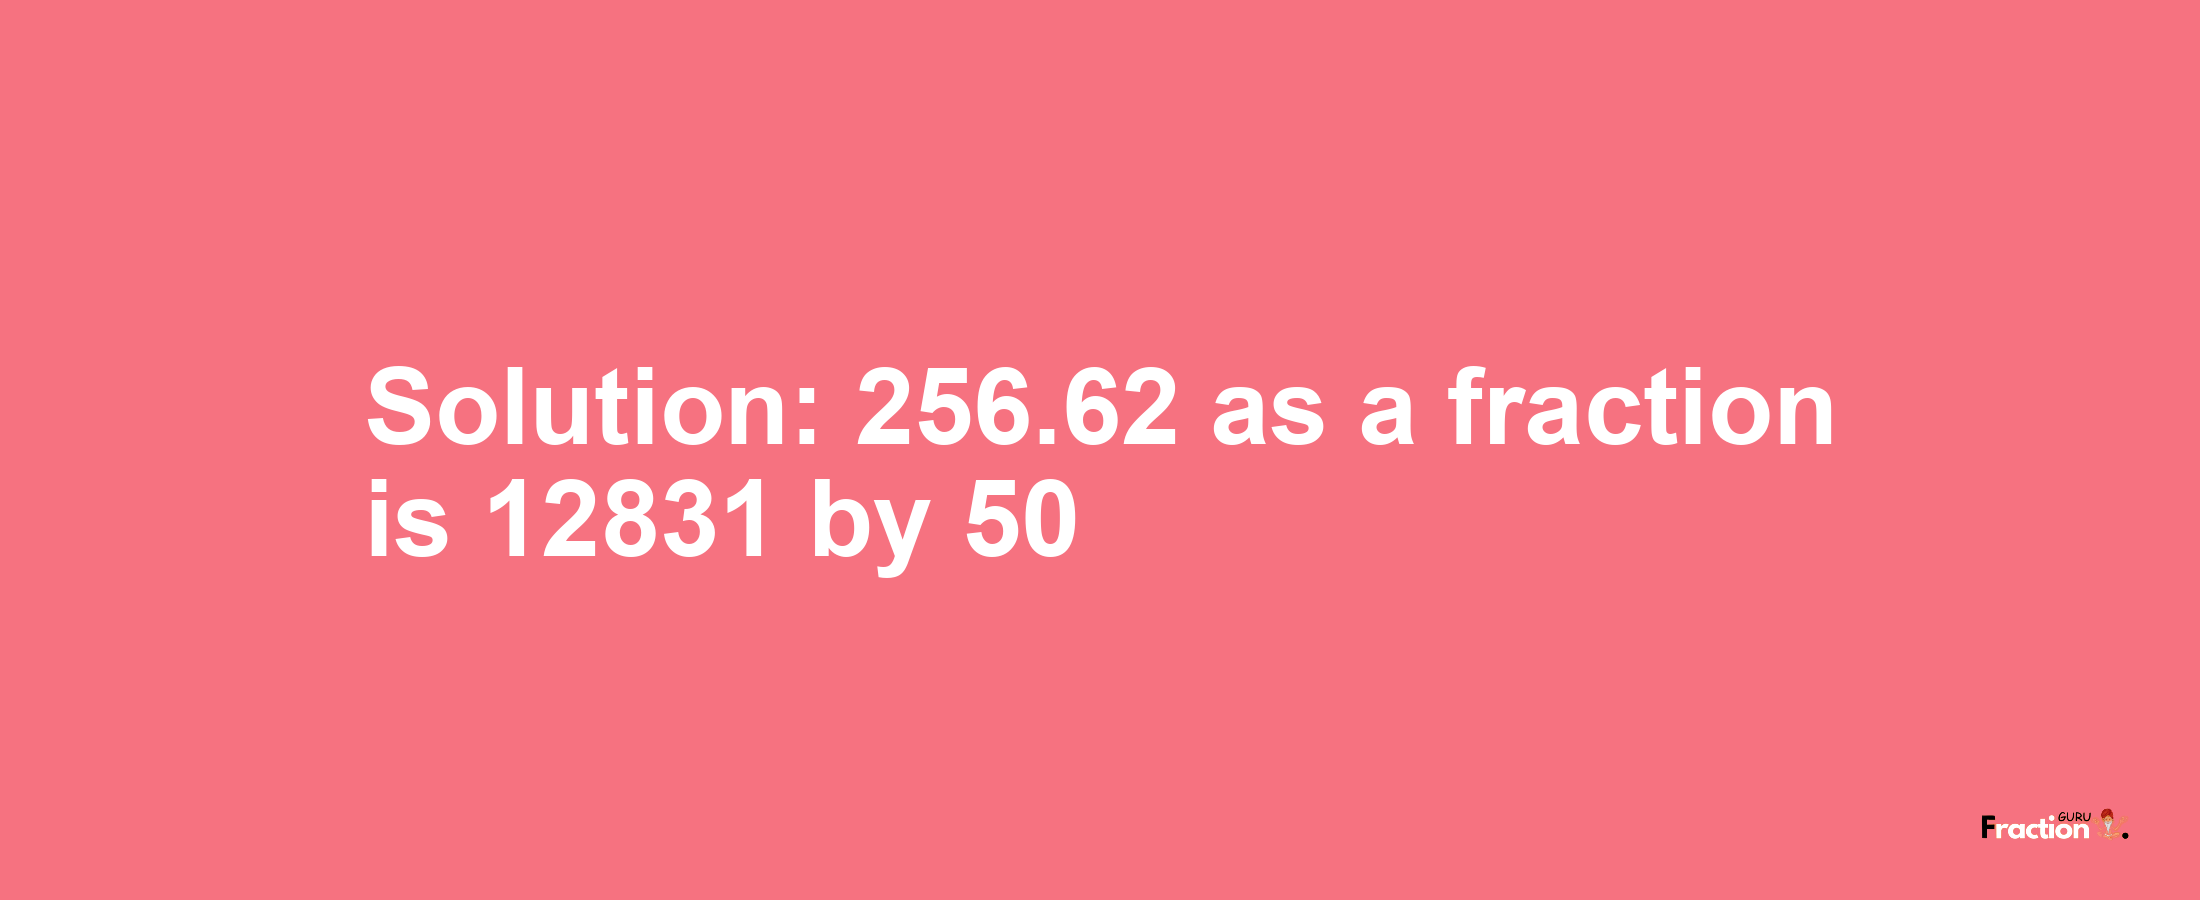 Solution:256.62 as a fraction is 12831/50